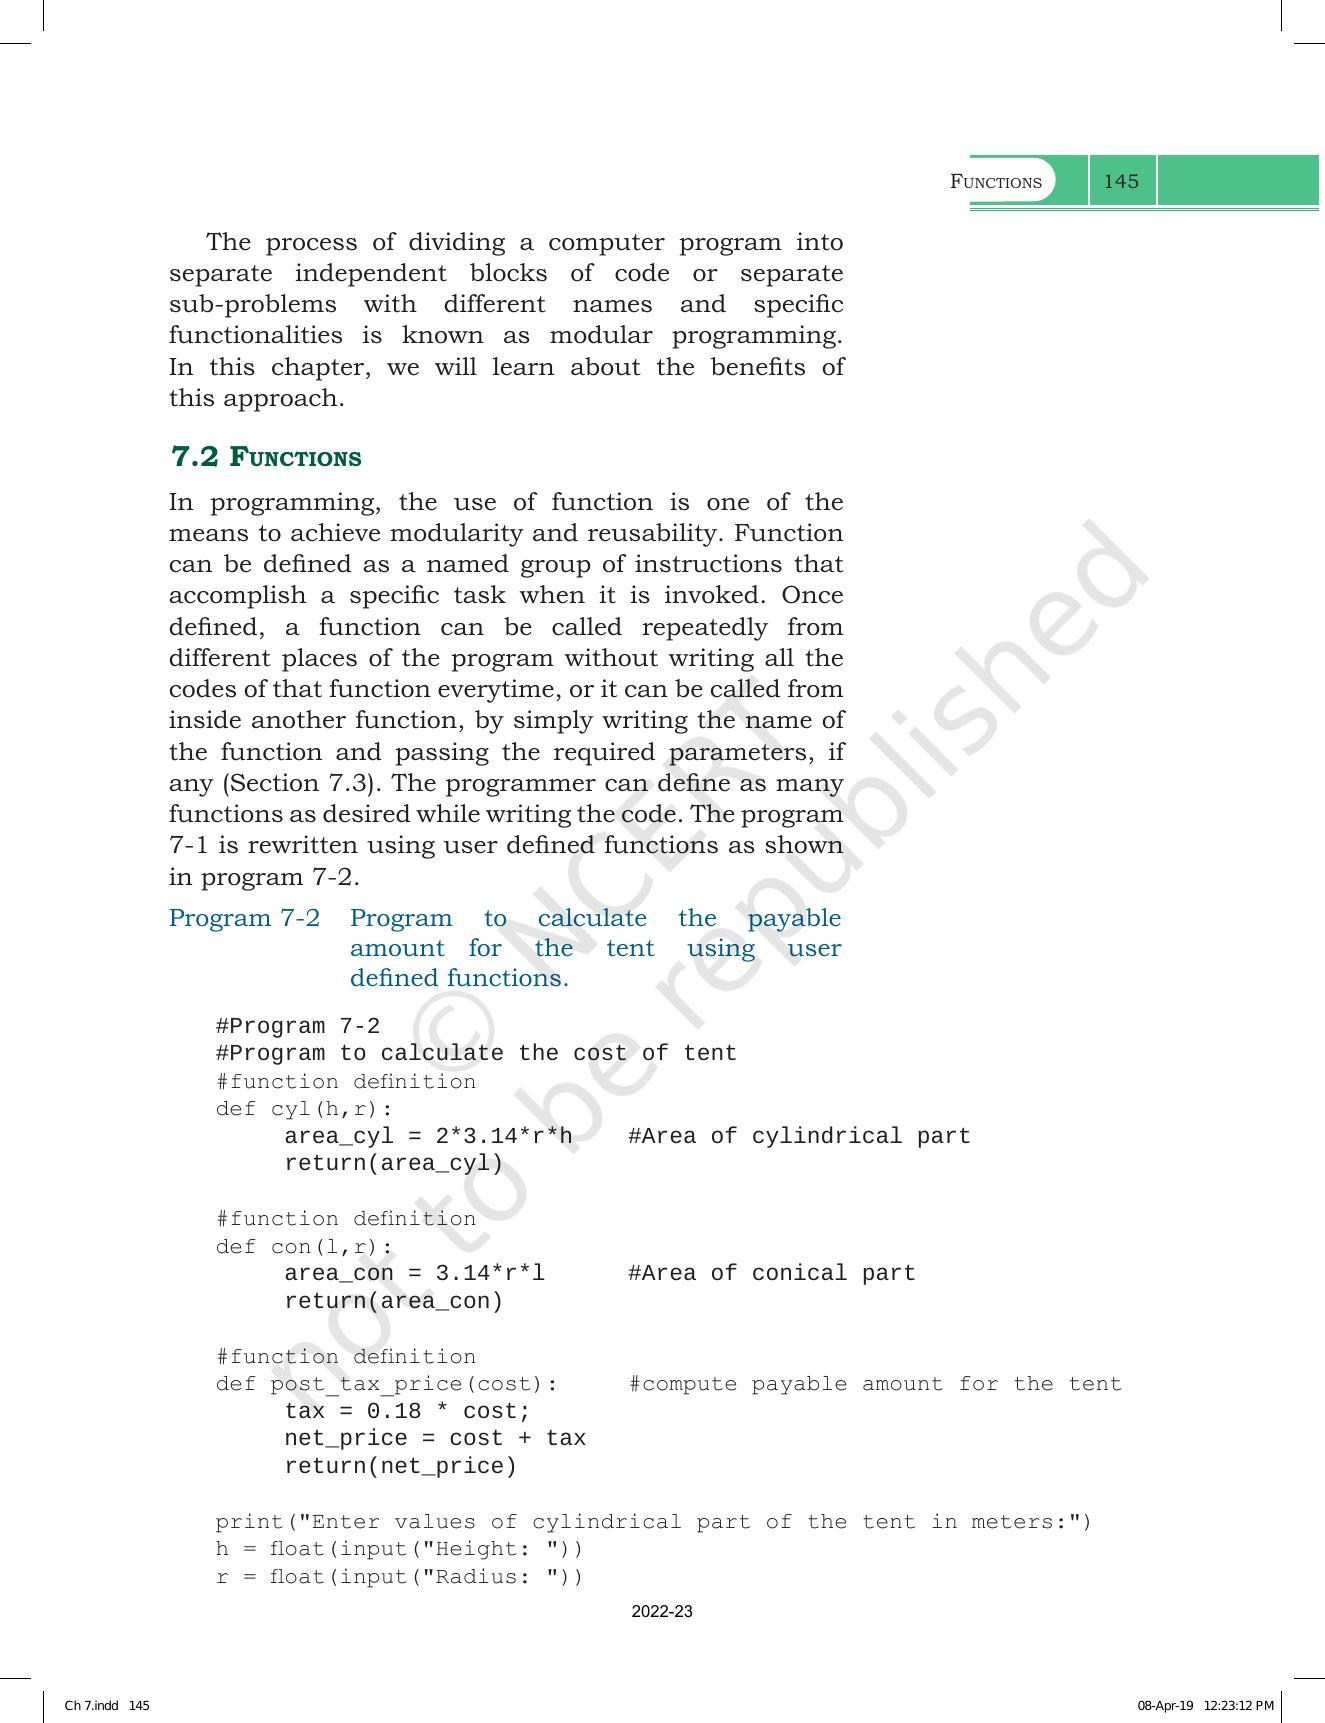 NCERT Book for Class 11 Computer Science Chapter 7 Functions - Page 3